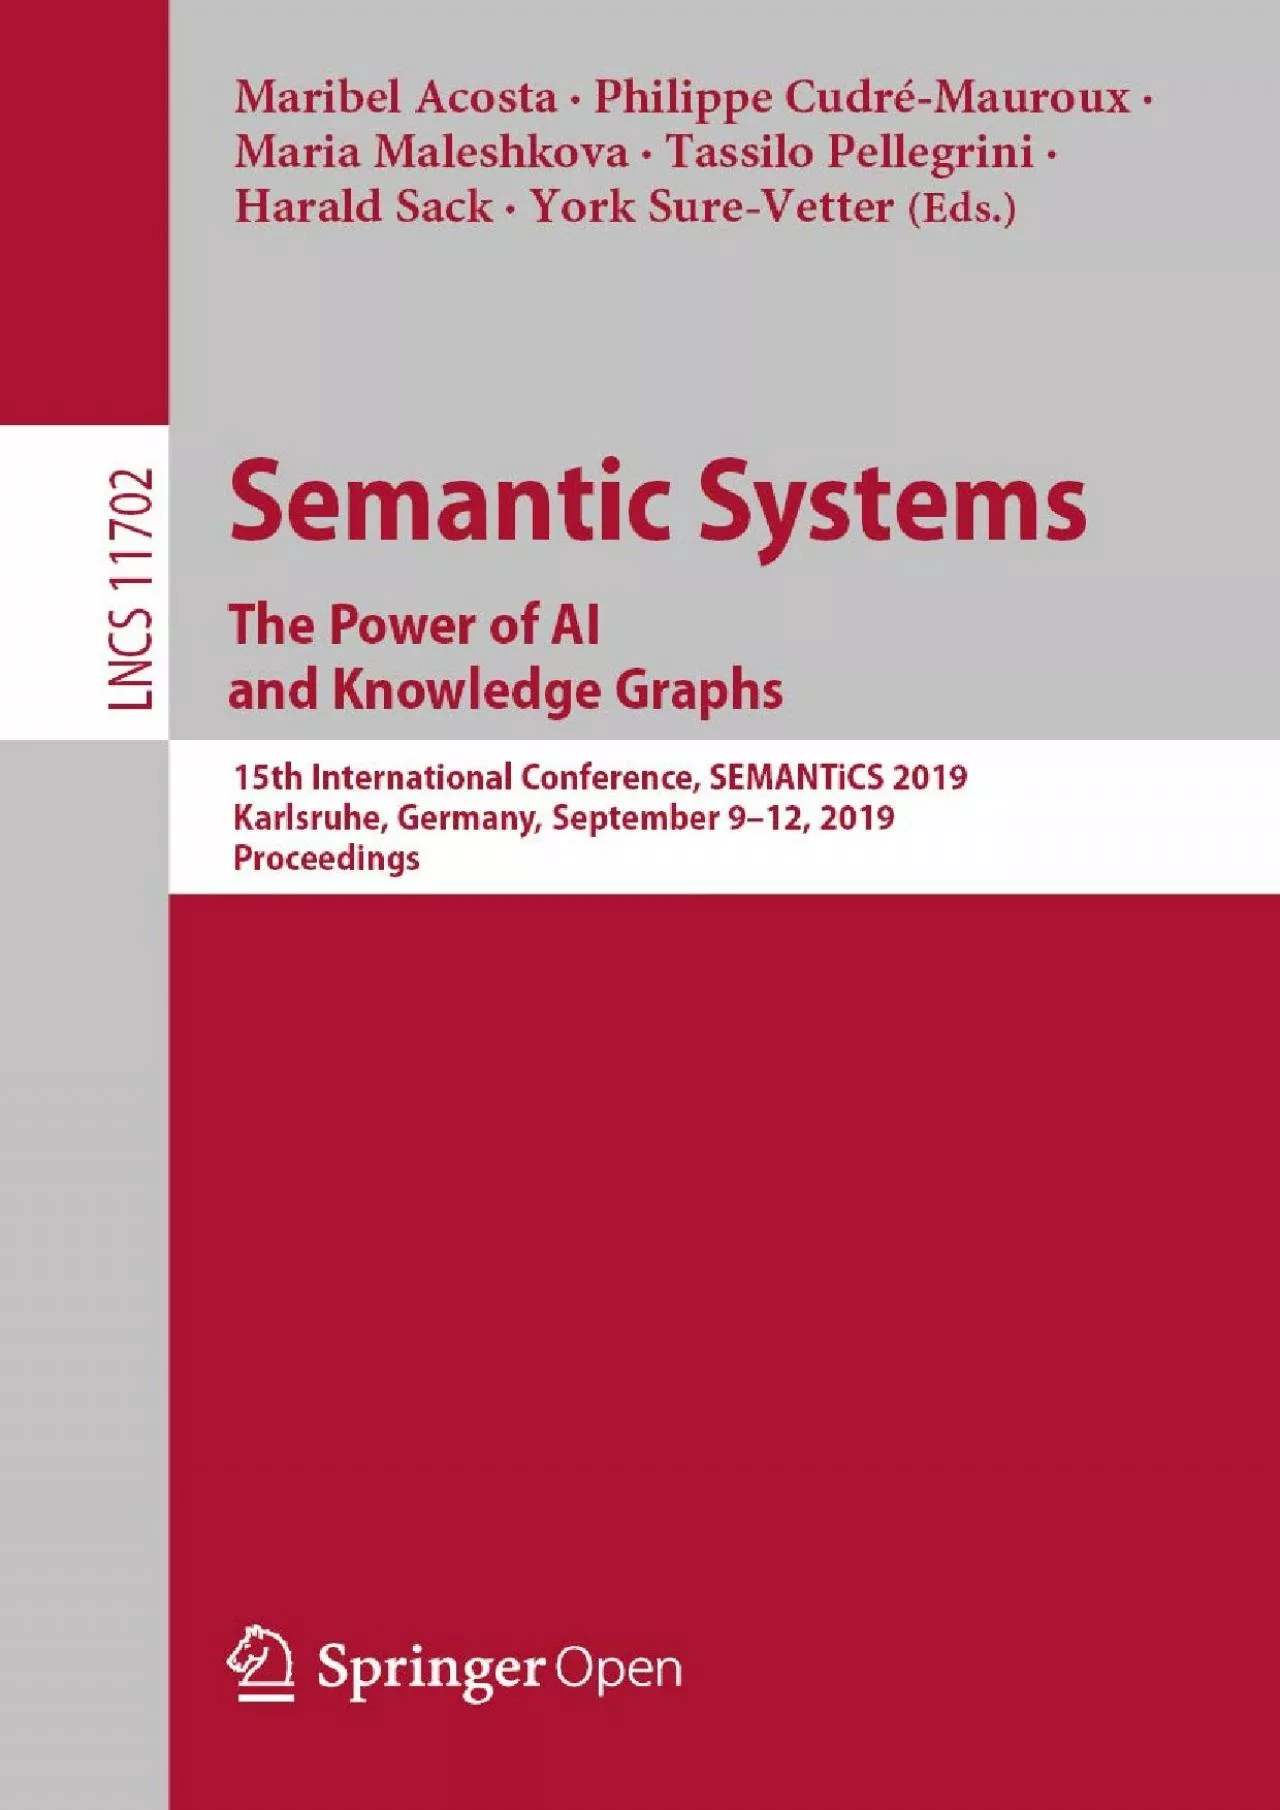 (DOWNLOAD)-Semantic Systems The Power of AI and Knowledge Graphs 15th International Conference